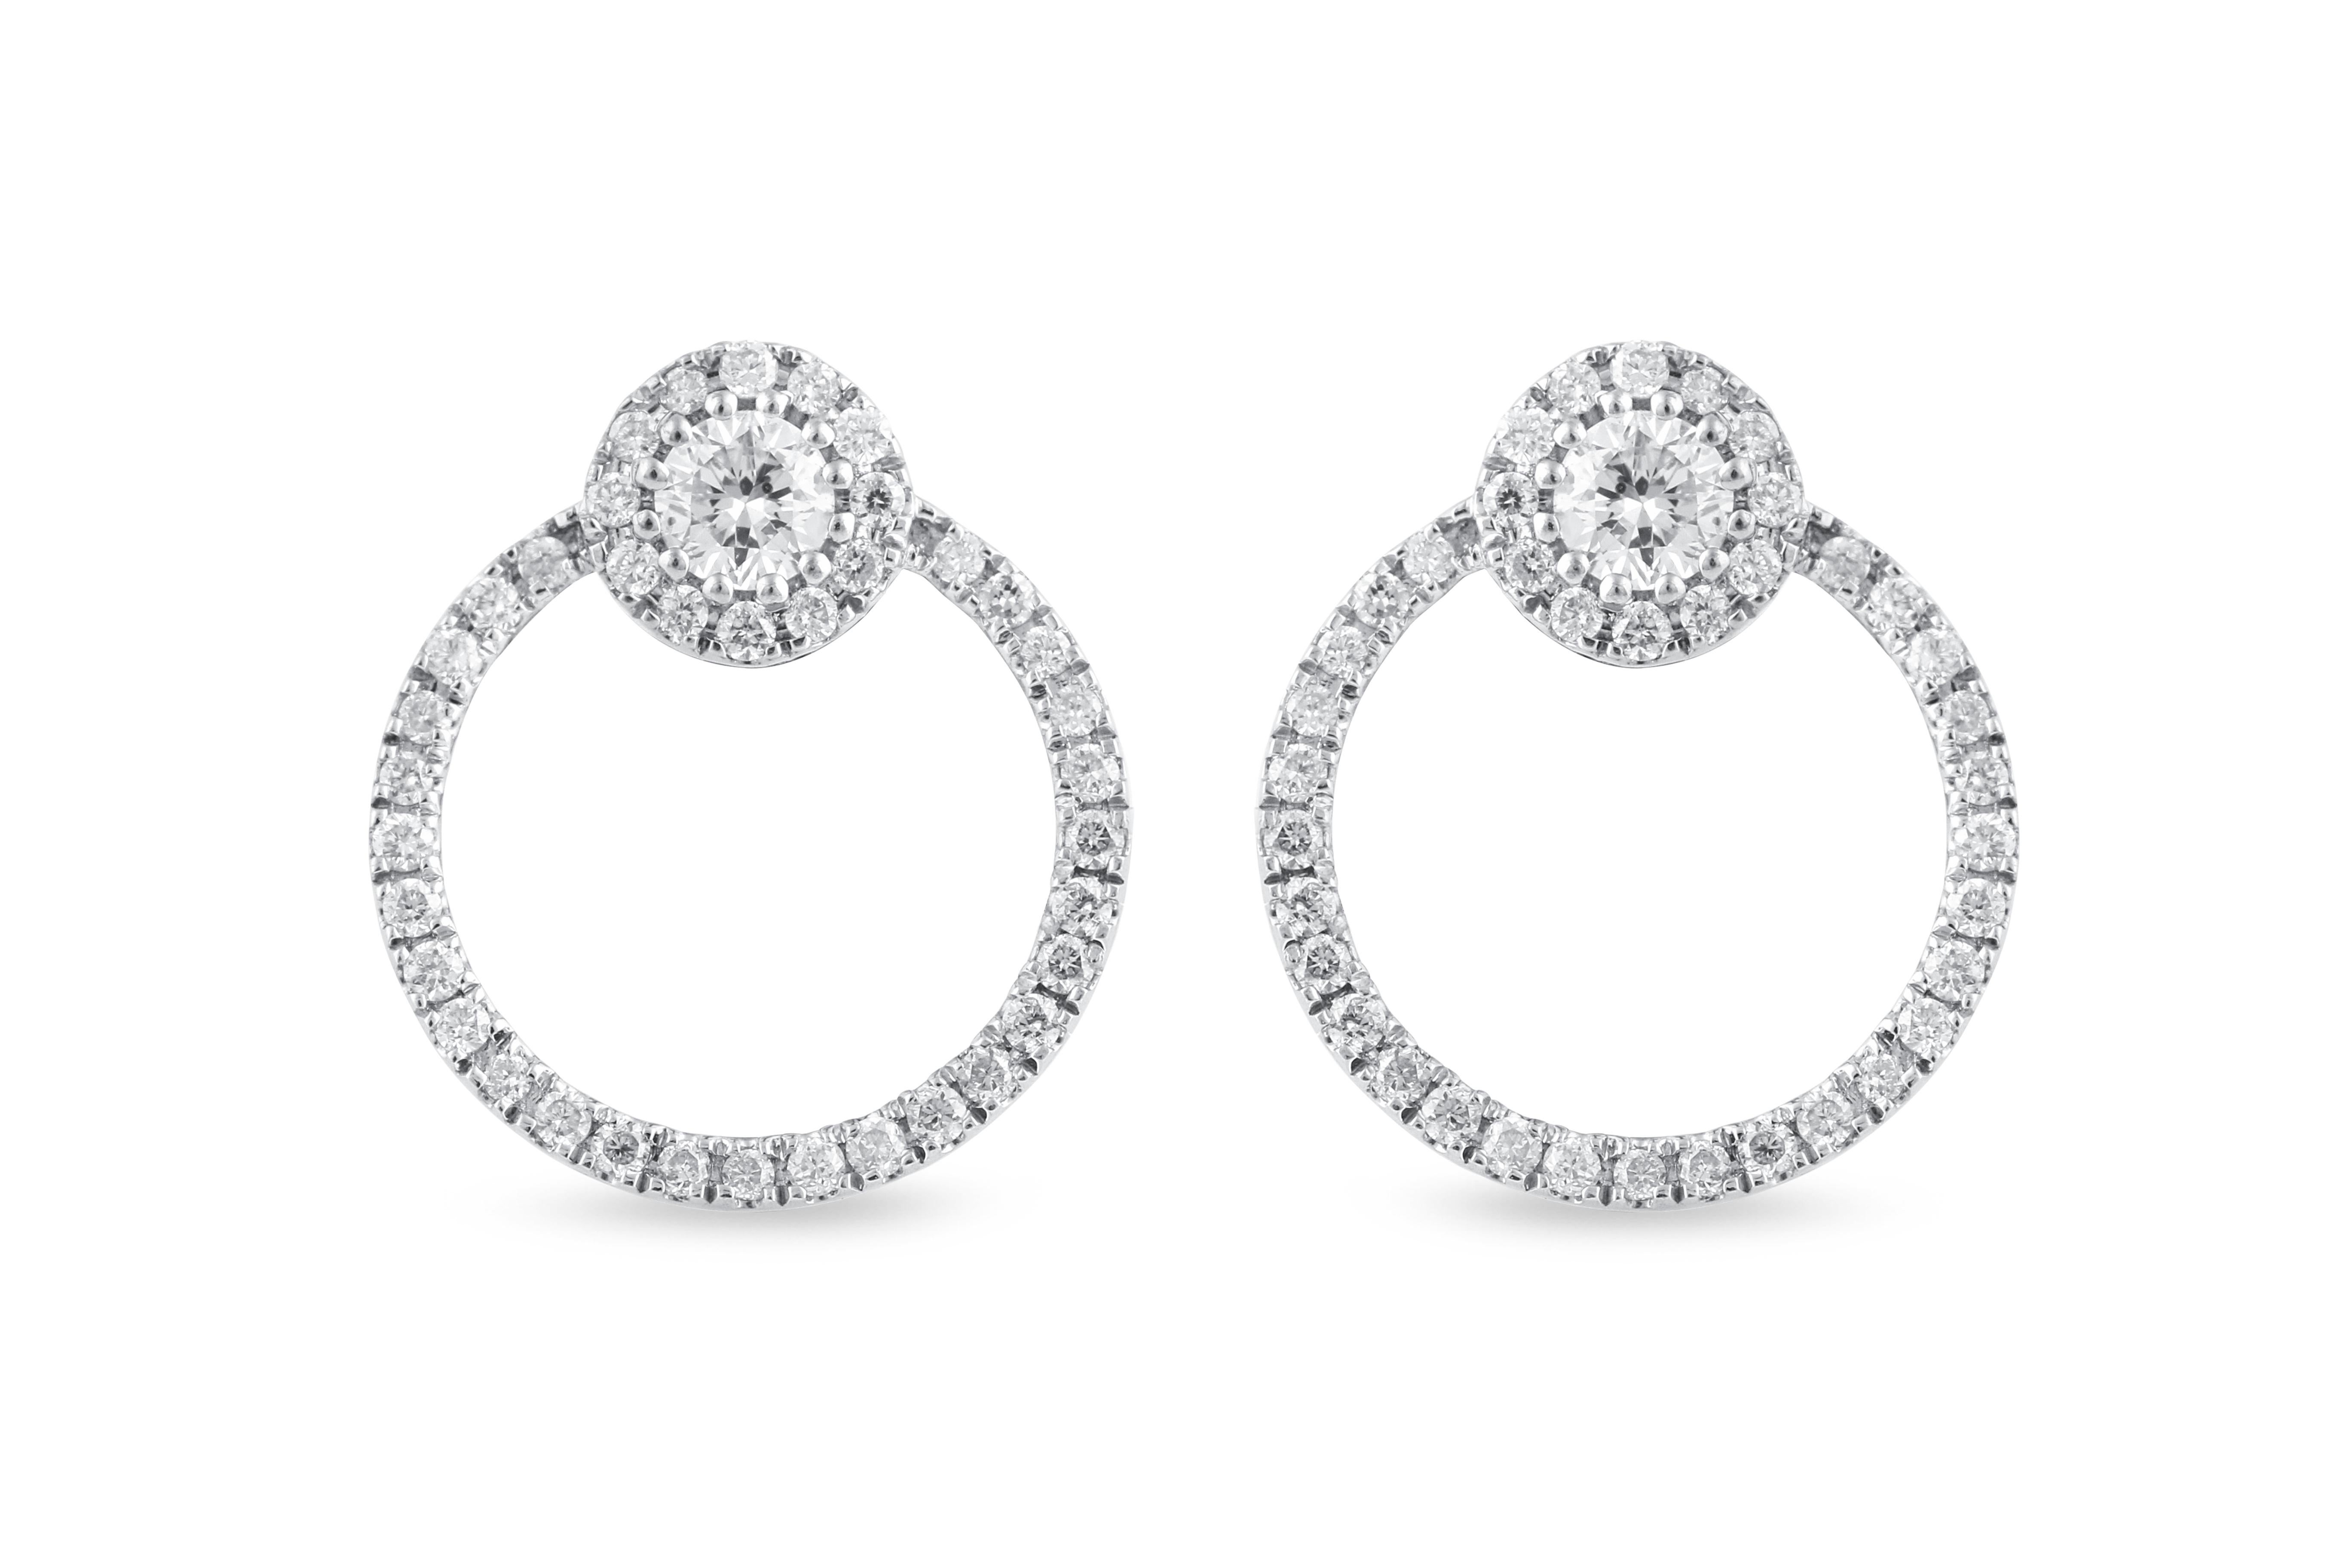 Our gorgeous diamond Earrings are finely set into the most astonishing designs ranging from modern-era jewels to fascinating classics, and they will certainly rekindle the romance between you and your spouse. Our Diamond Earrings are a regal